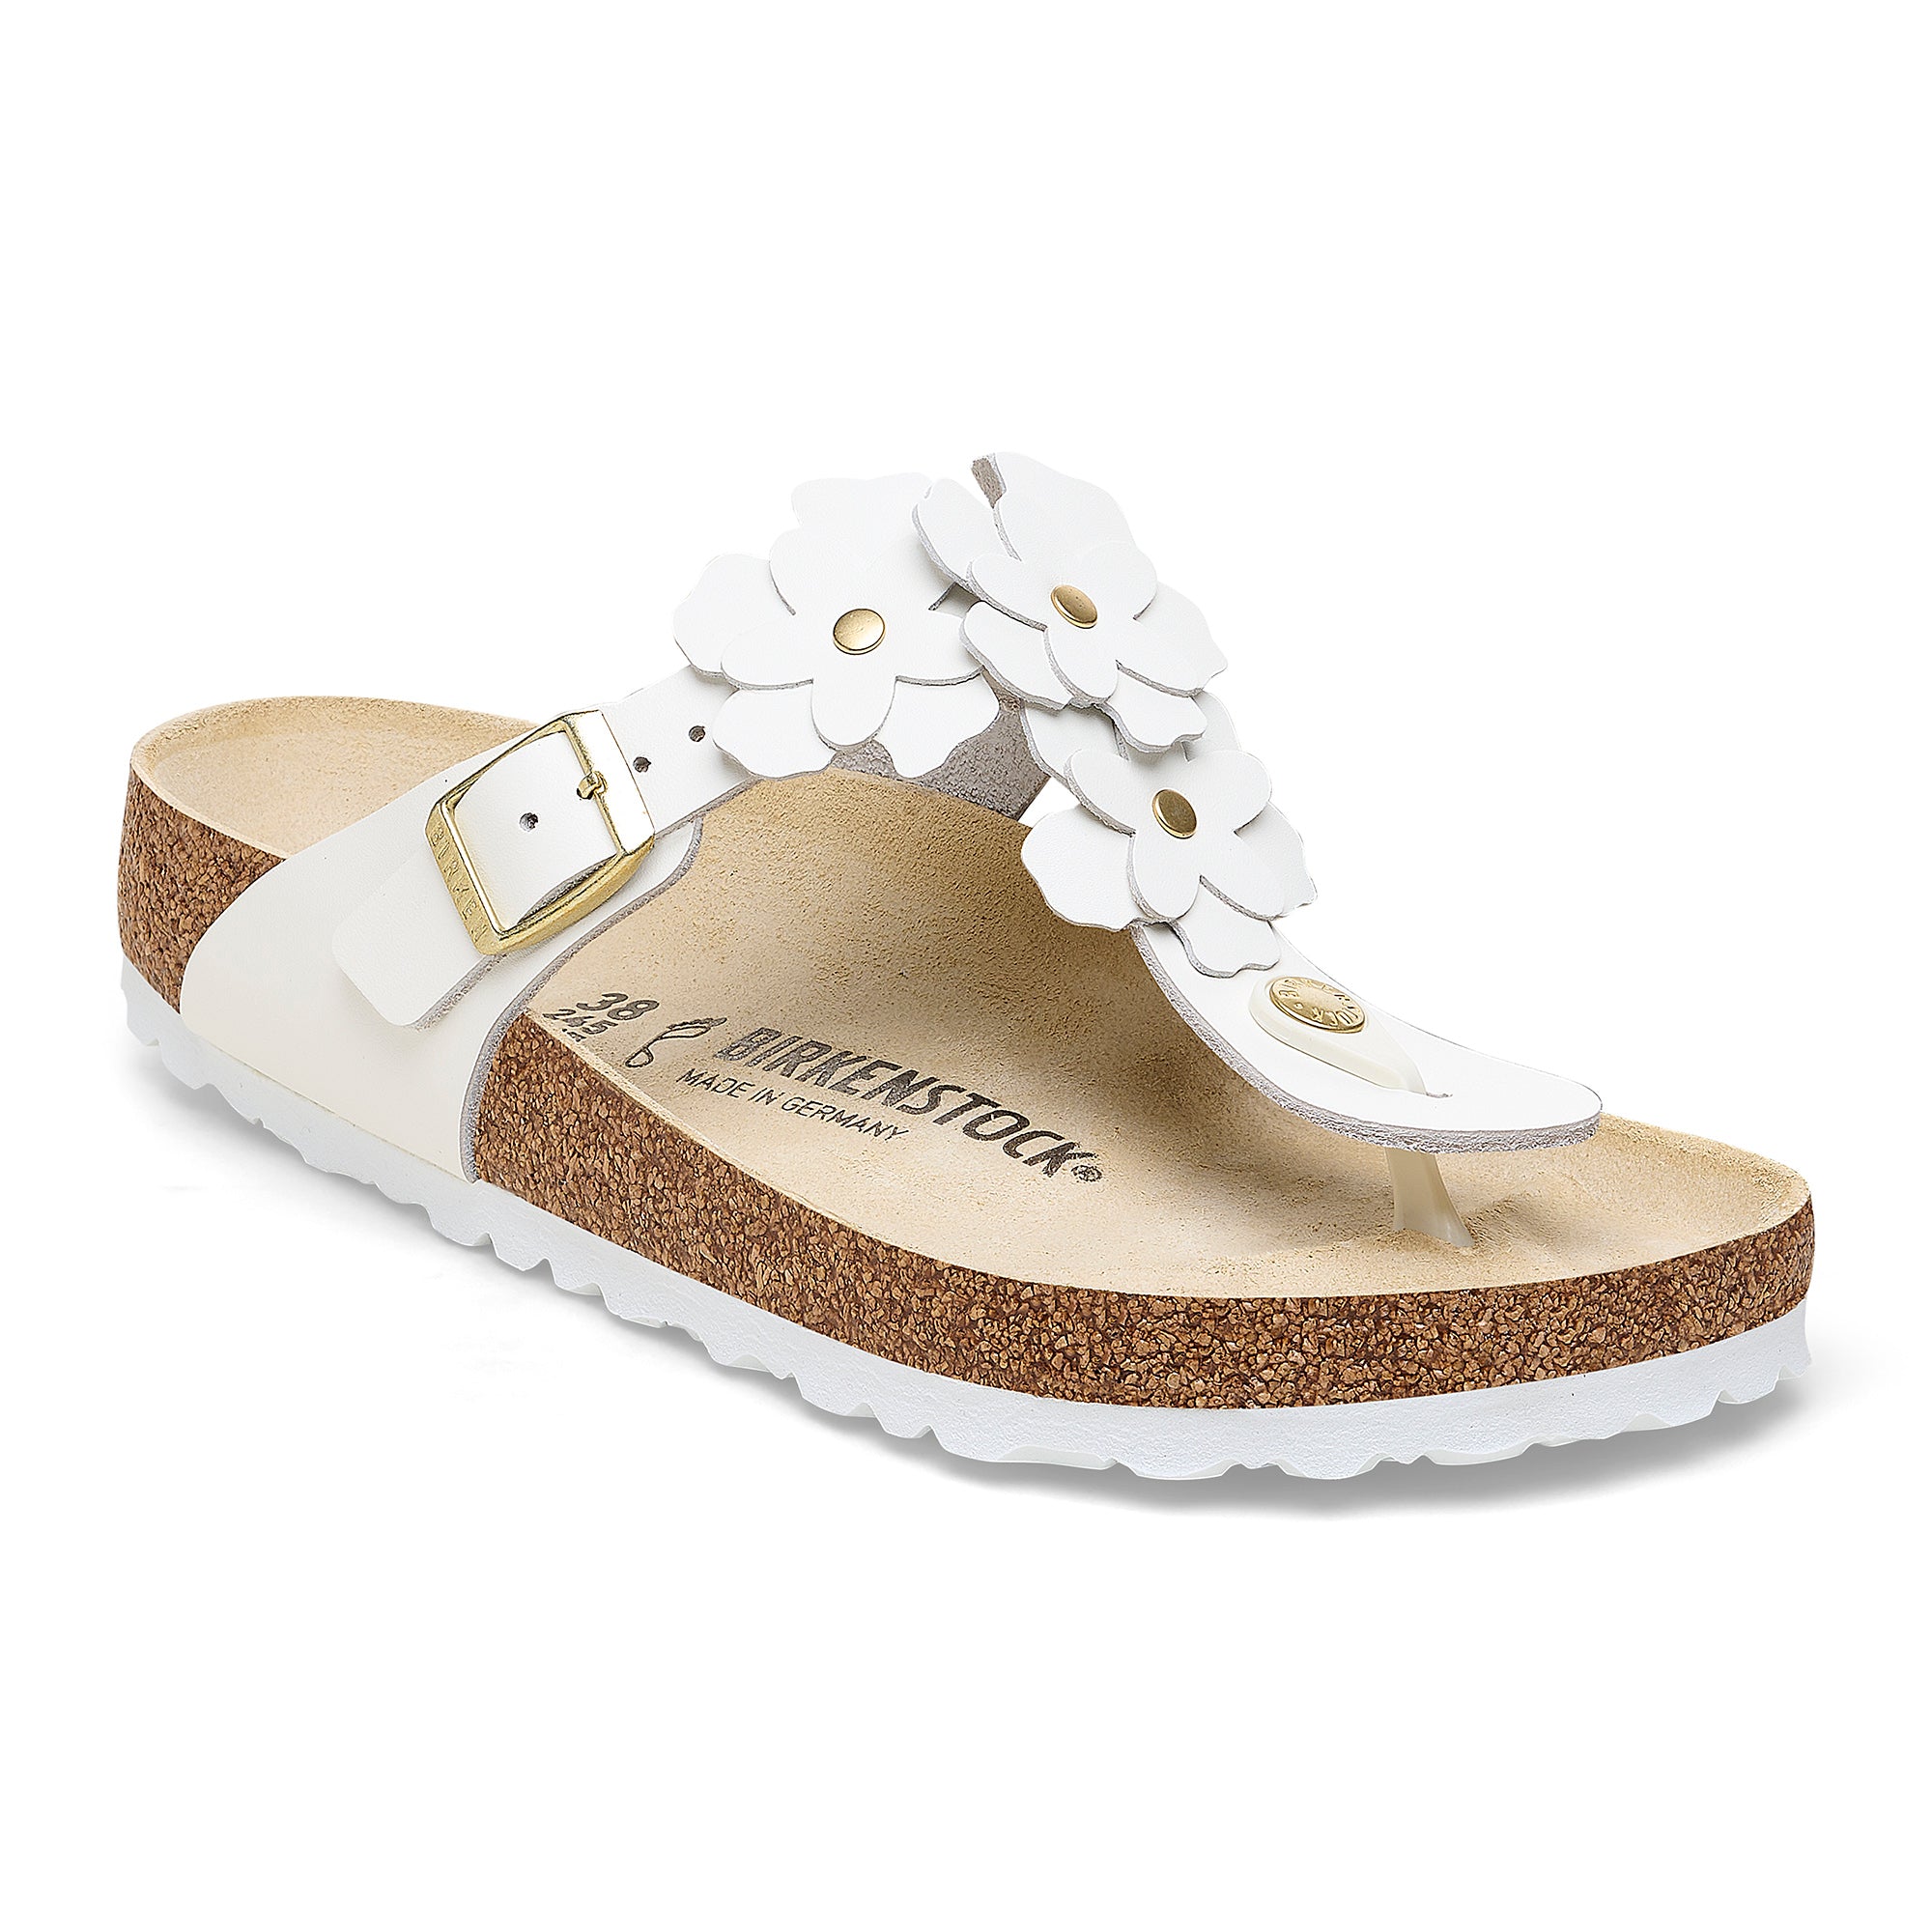 Birkenstock Limited Edition Gizeh Flowers white leather